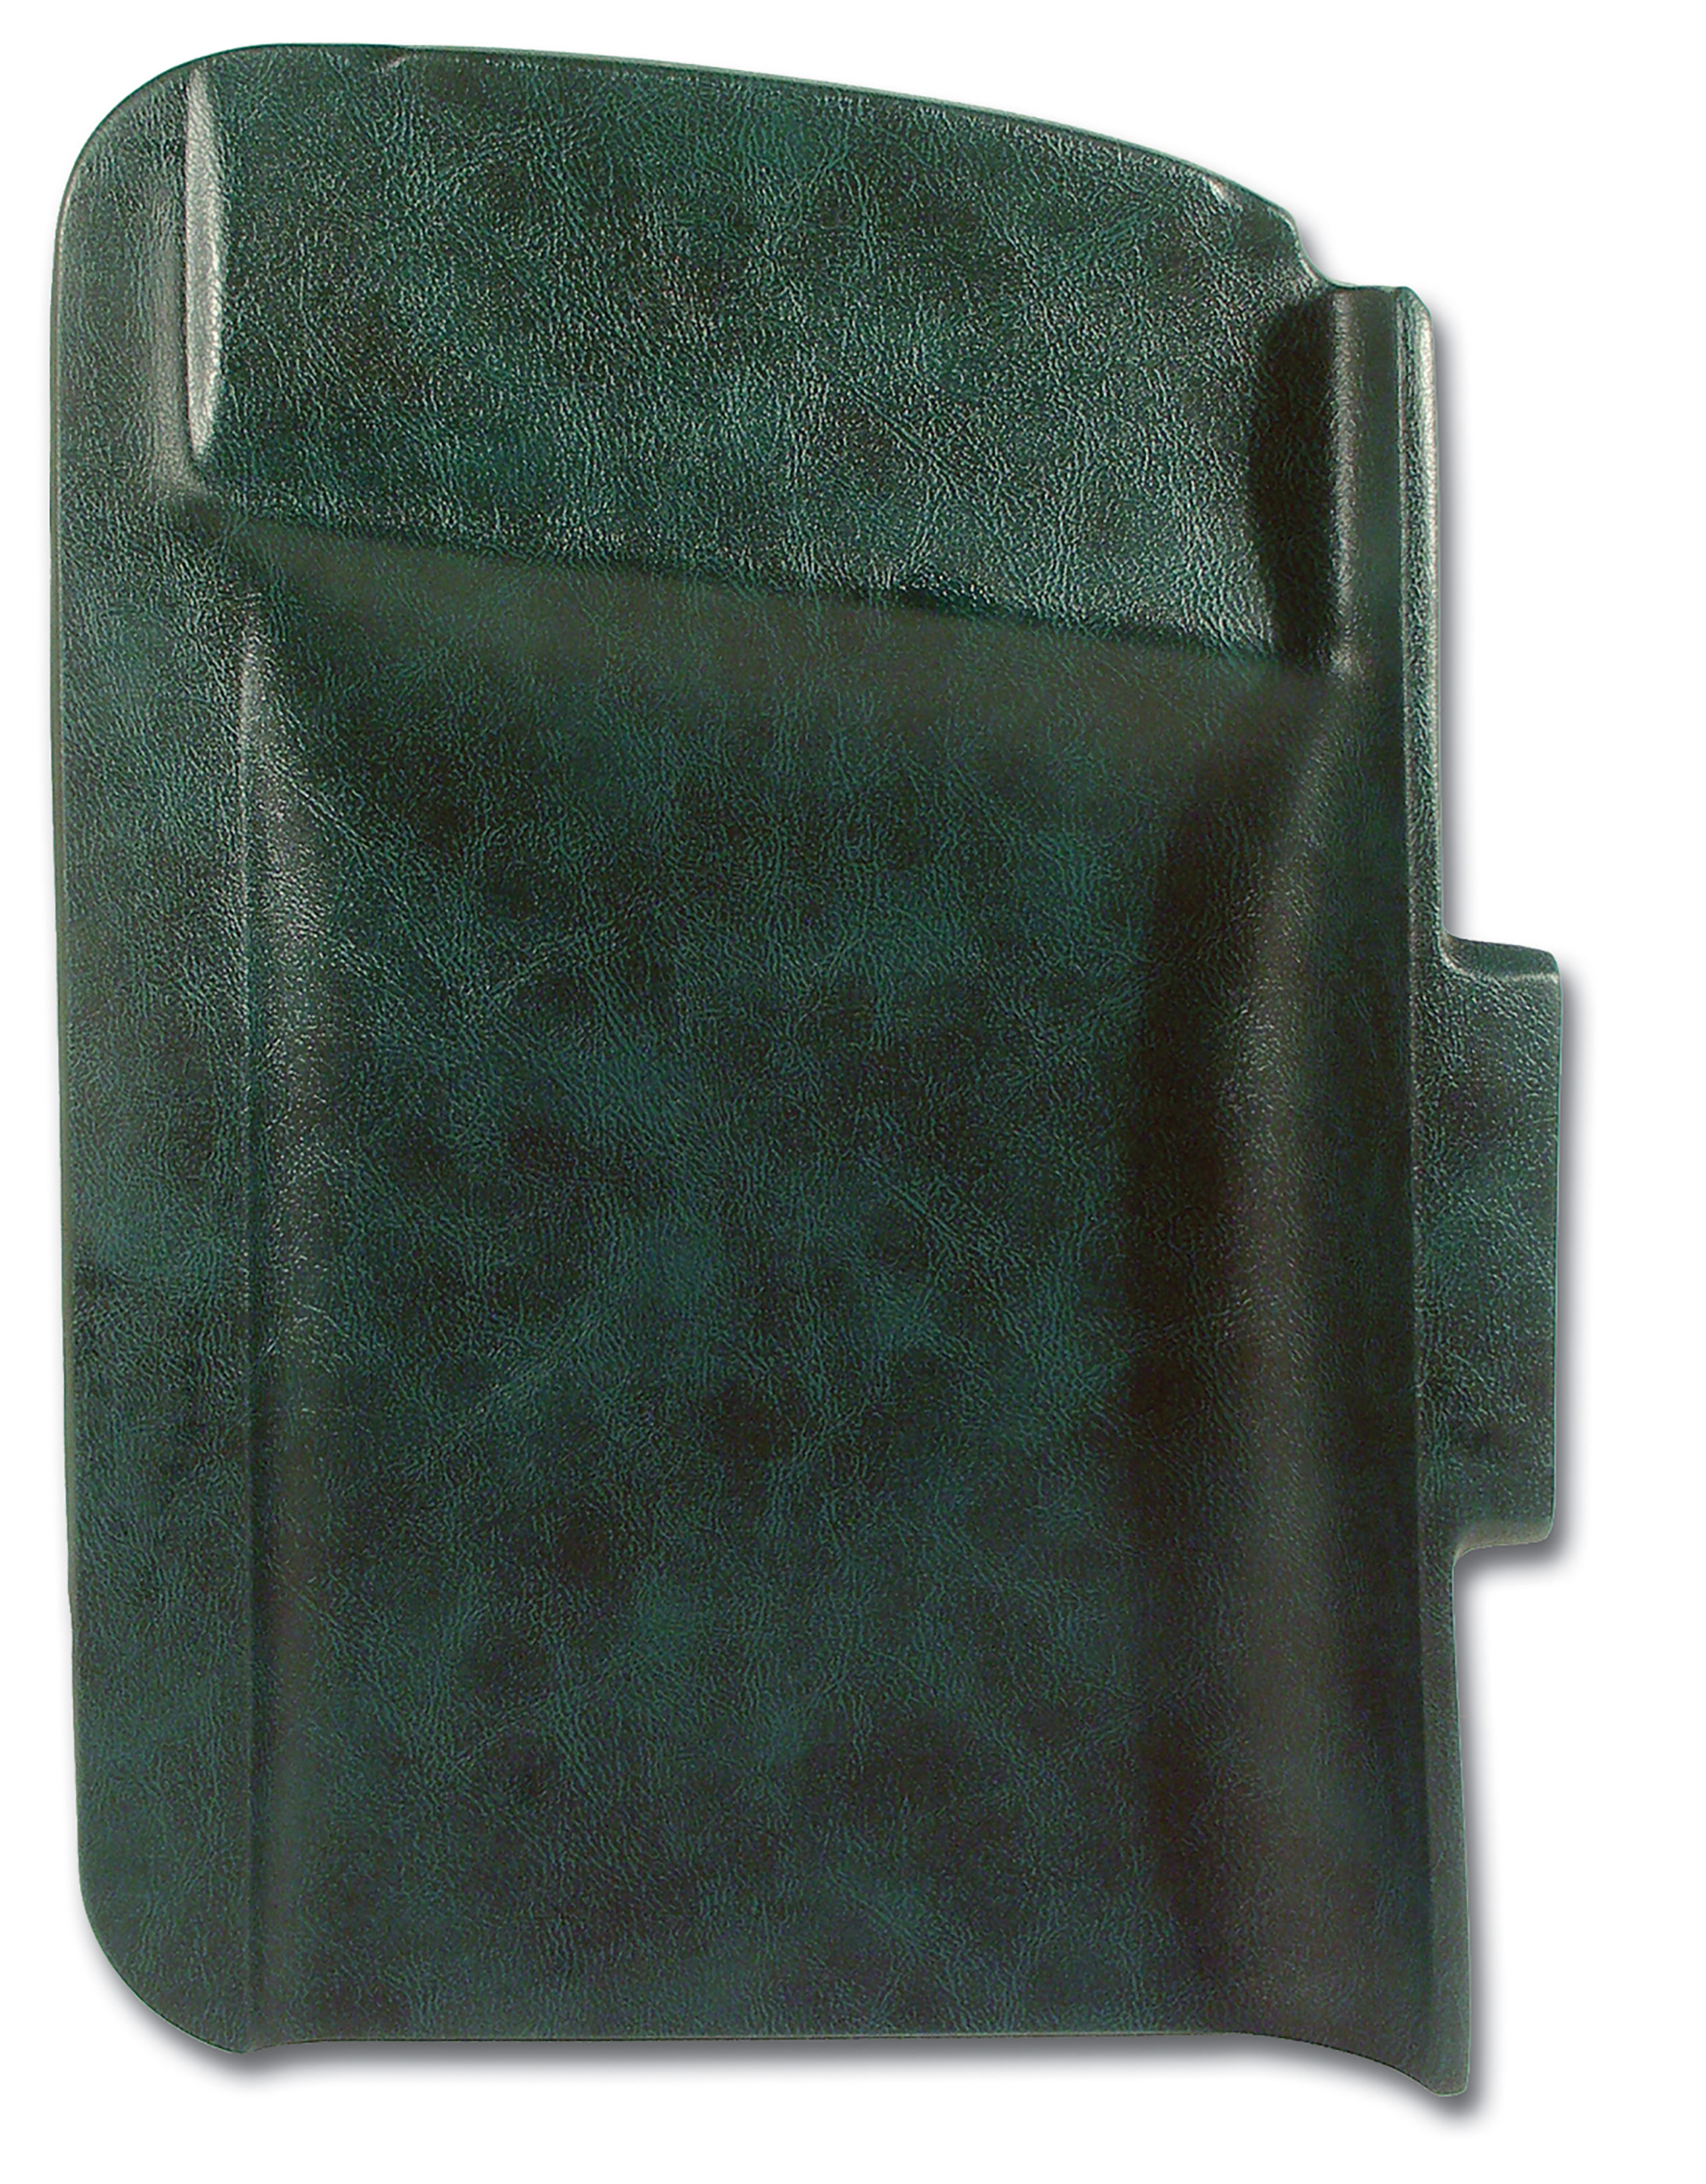 T-Top Pad- Green LH For 1971 Corvette